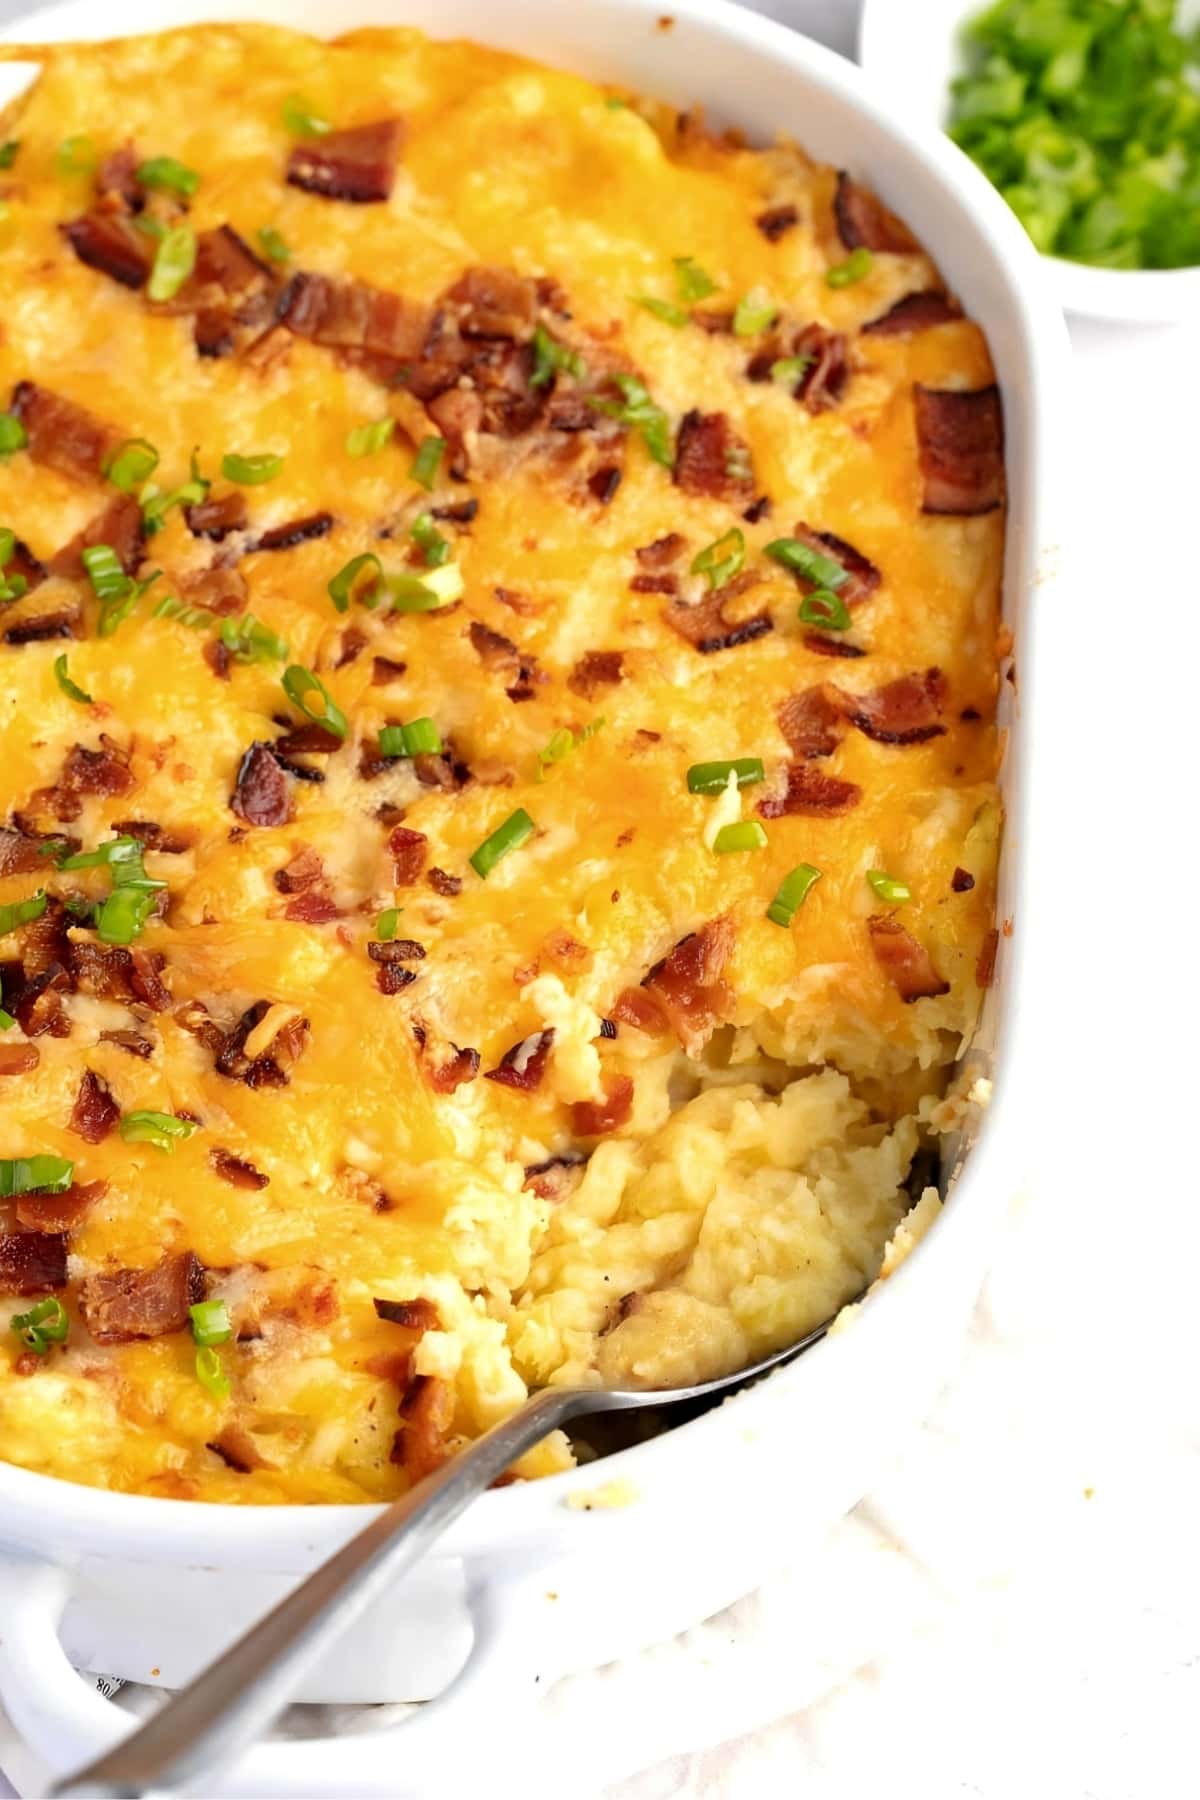 Loaded Mashed Potatoes with Bacon, Green Onions in a White Casserole